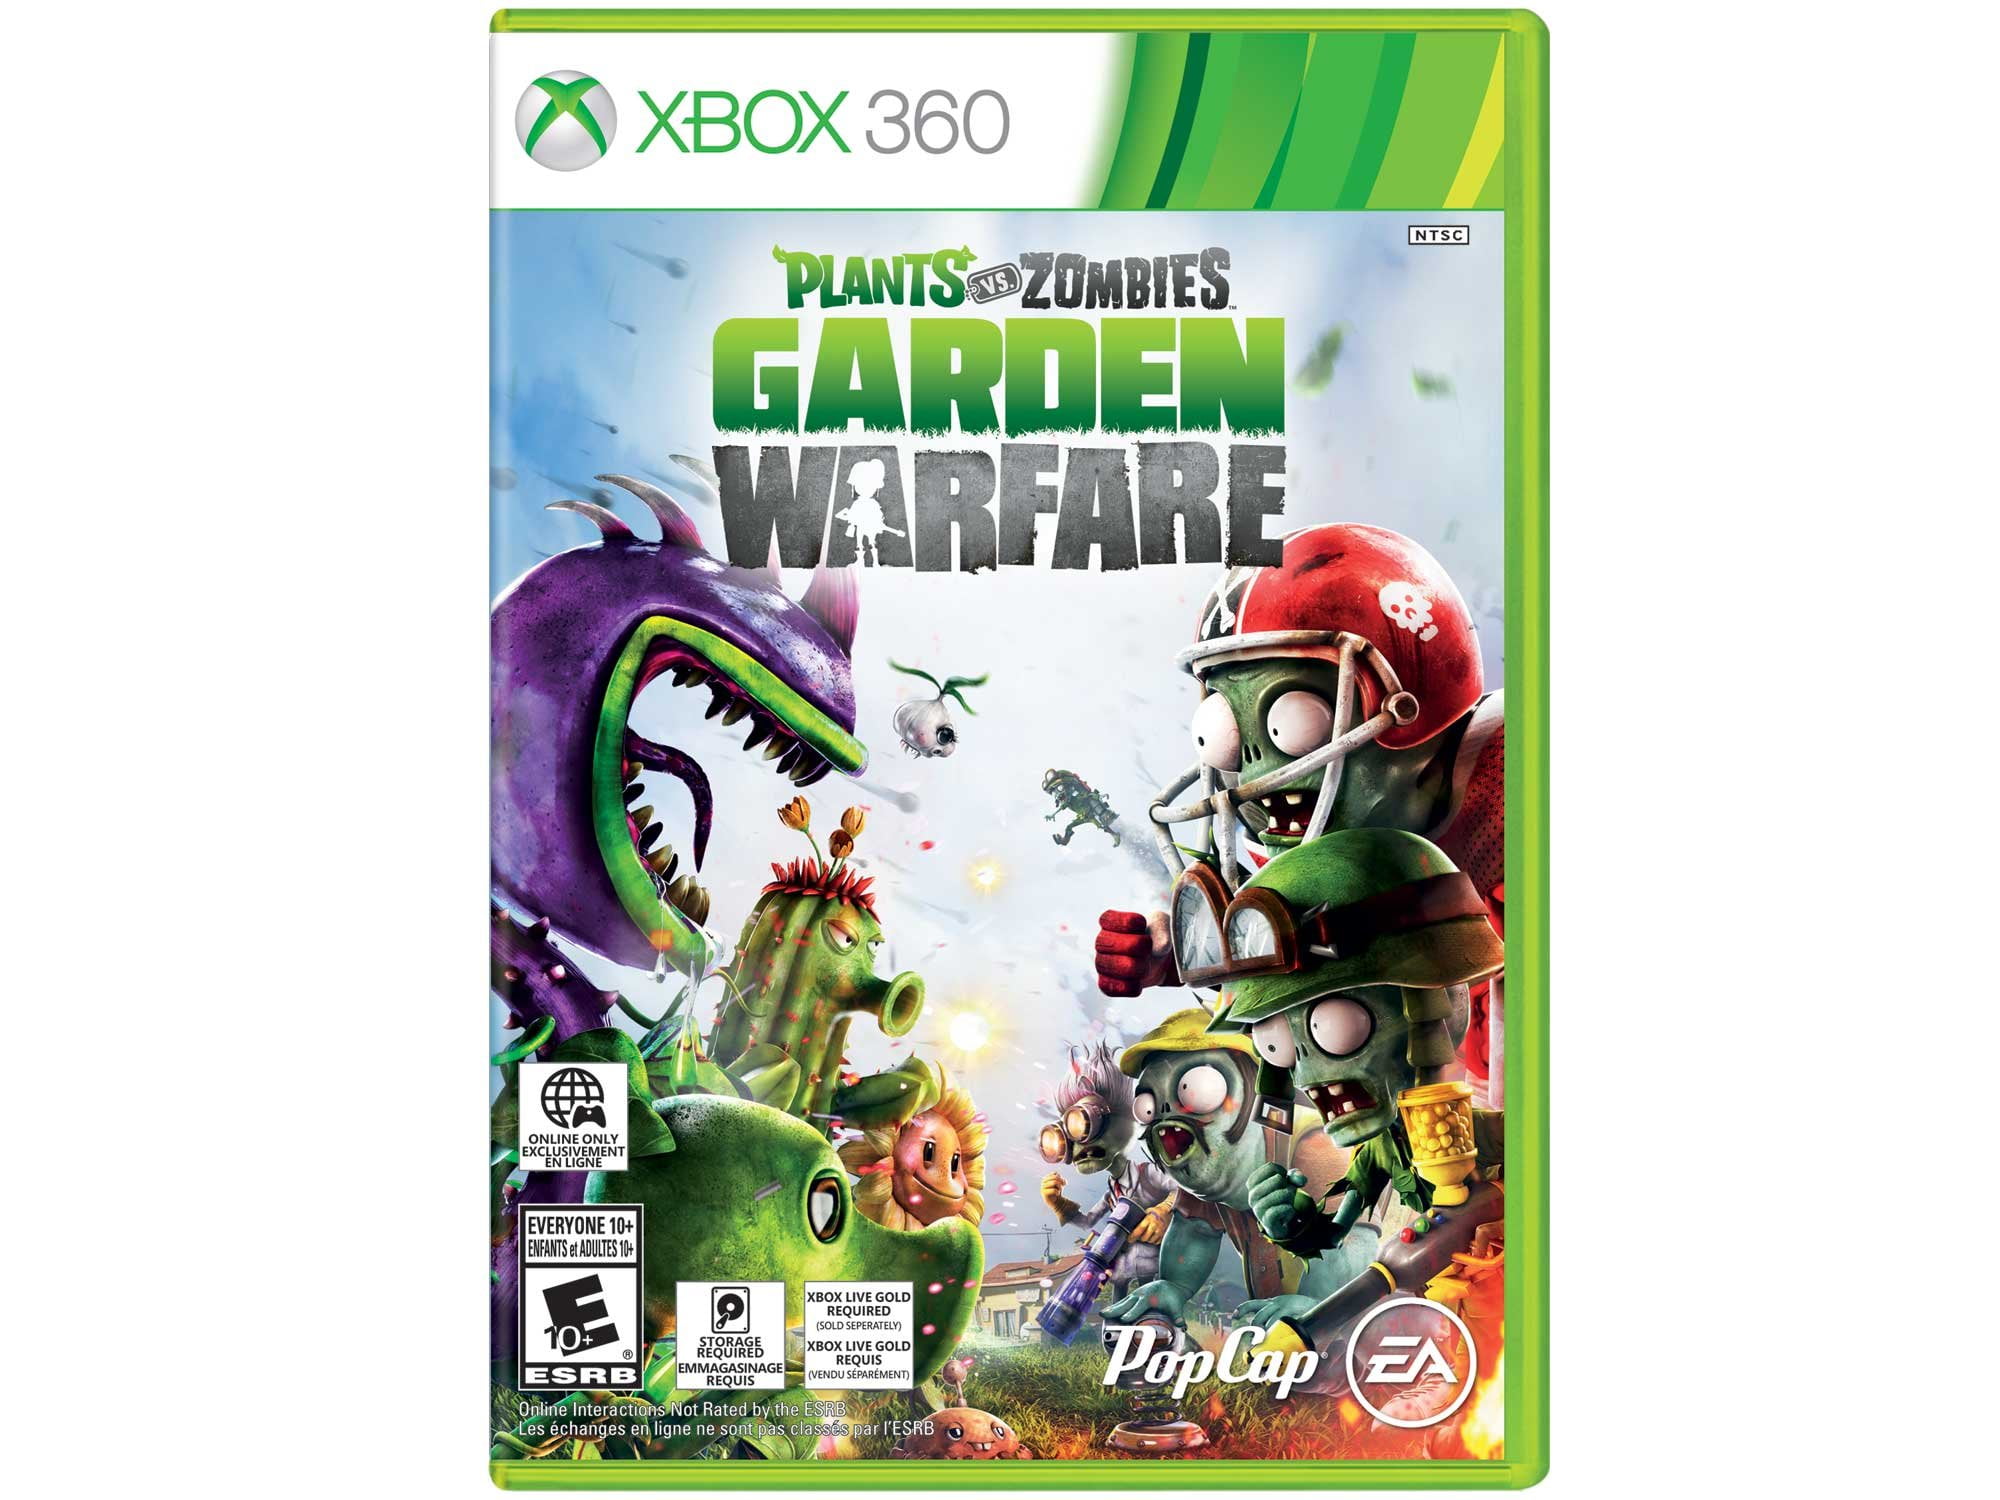 zombie games for xbox 360